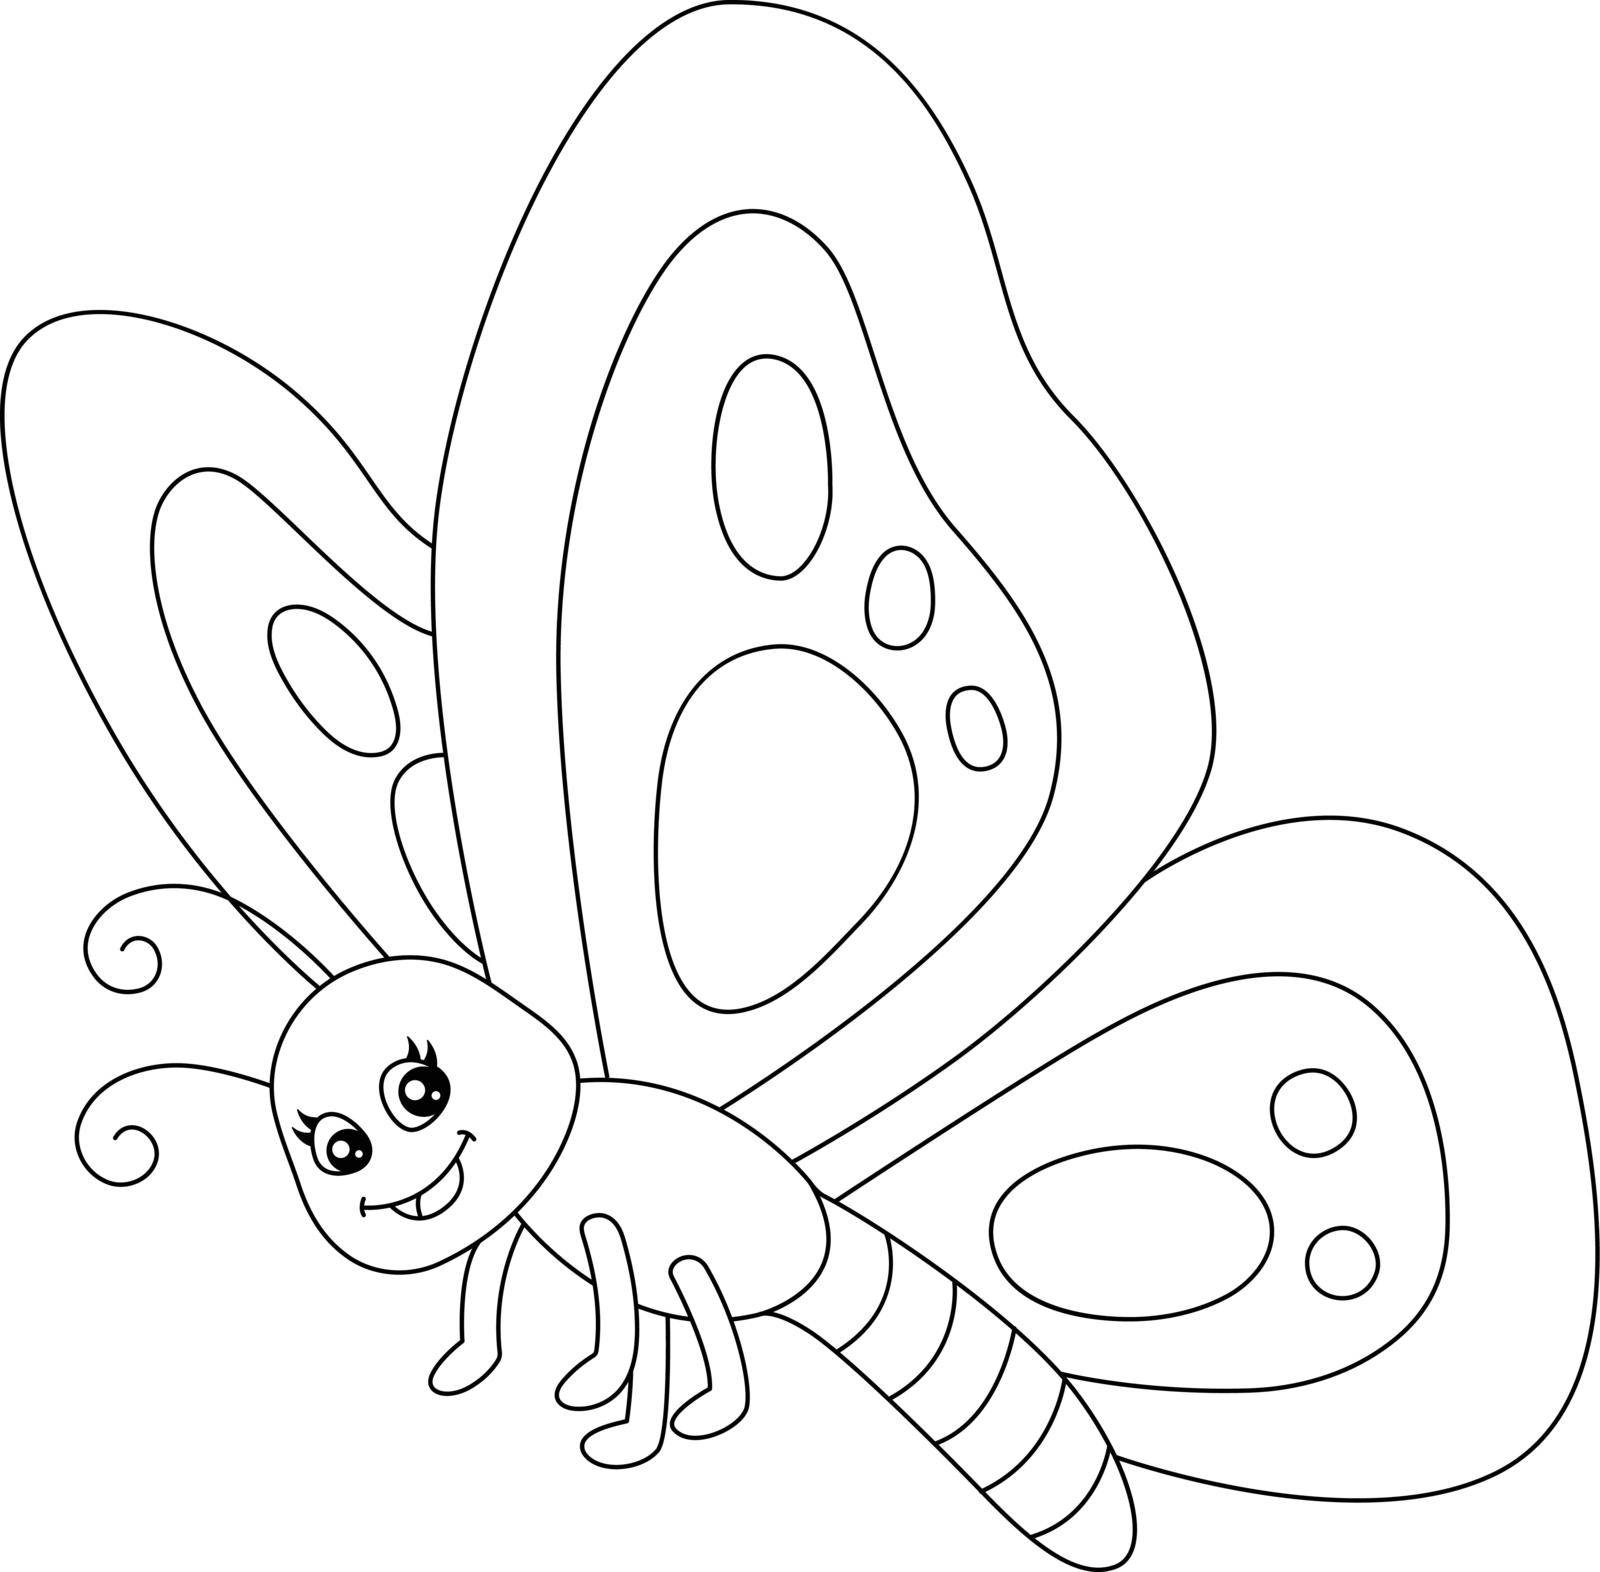 A cute and funny coloring page of a butterfly. Provides hours of coloring fun for children. To color, this page is very easy. Suitable for little kids and toddlers.